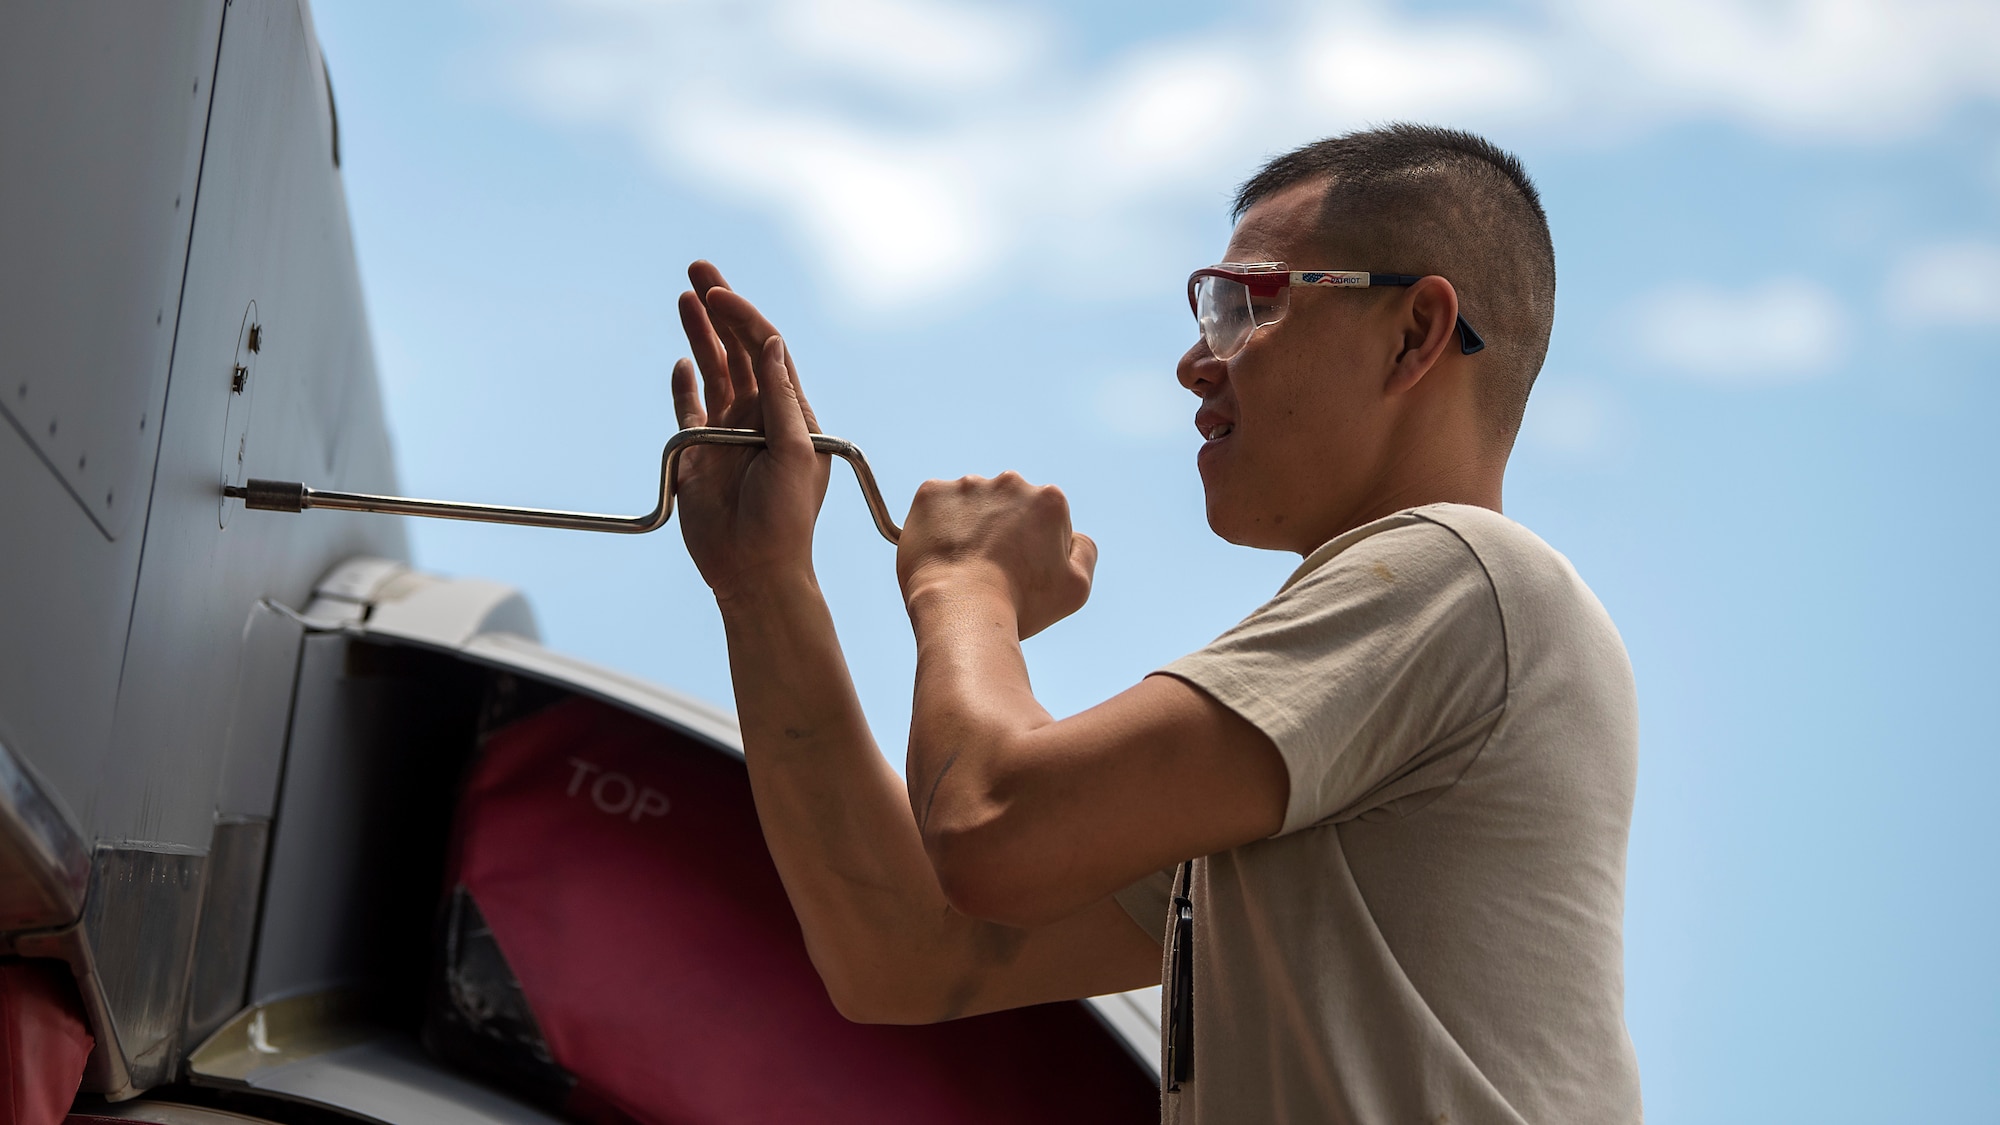 An aircraft maintenance crewmember unscrews a KC-135 Stratotanker aircraft panel during a 900-hour inspection at MacDill Air Force Base, Fla., May 16, 2018. During this inspection, maintenance crewmembers perform major and minor servicing to the aircraft’s structure. MacDill’s contribution to global mobility is possible because of the maintenance Airmen who dedicate countless hours to ensure aircraft are fit for flight.